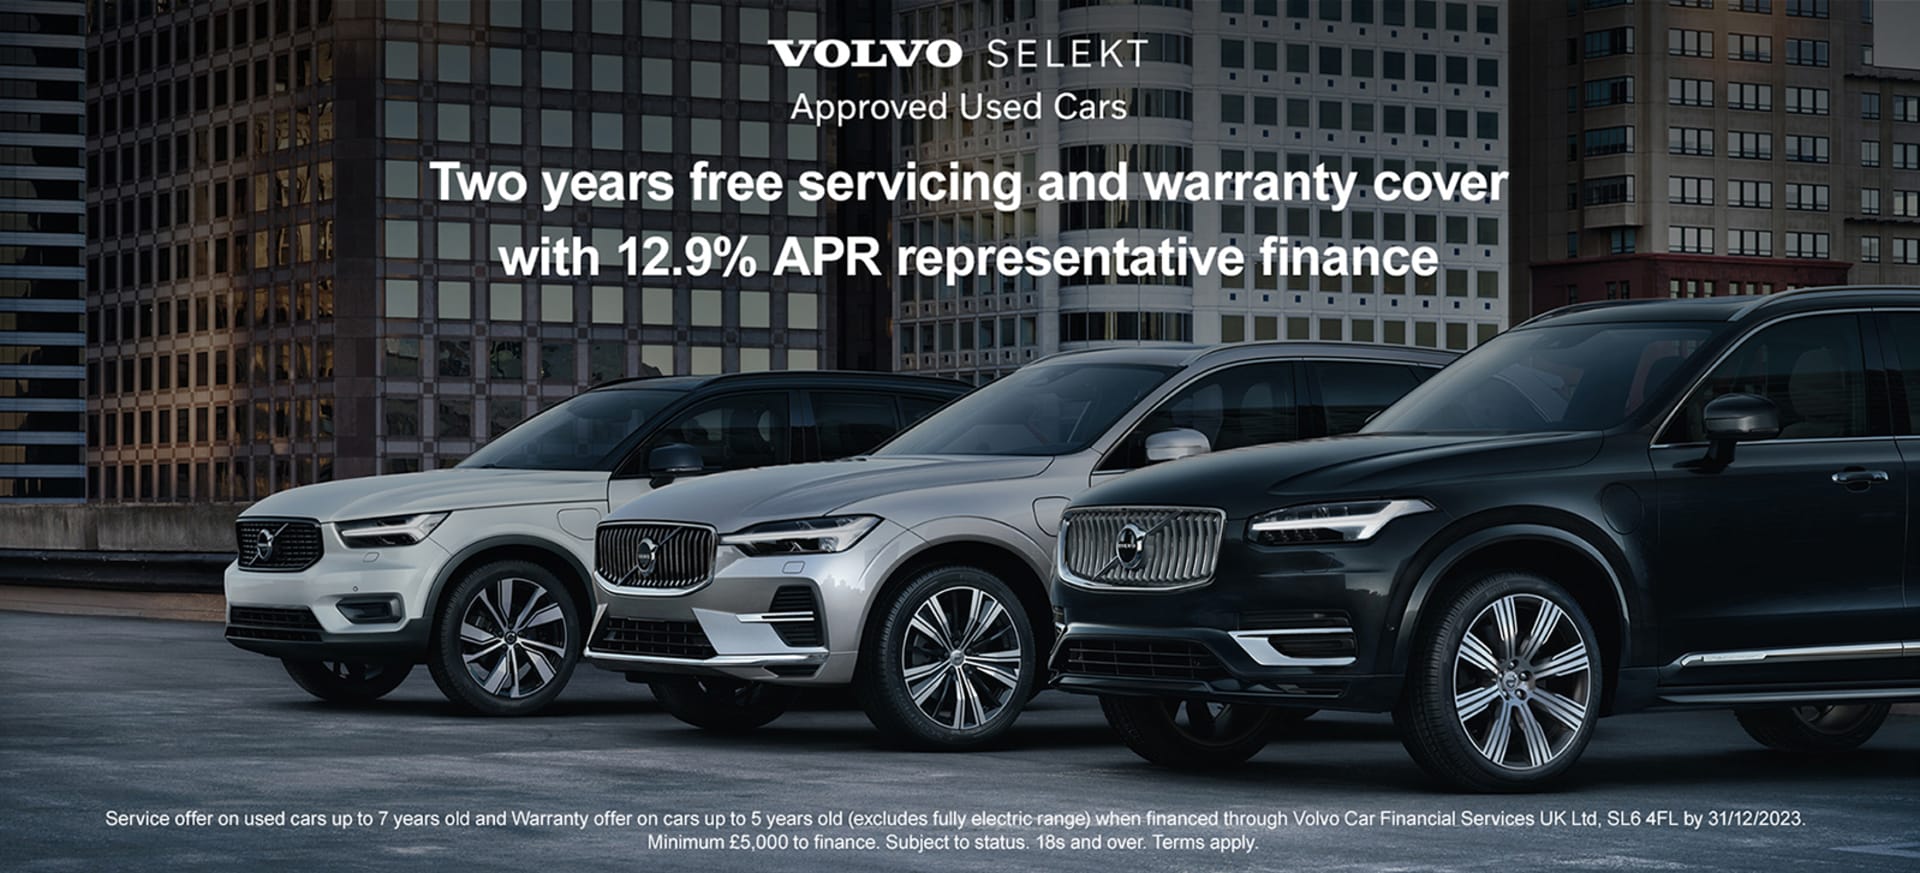 Volvo Selekt - Approved Used Cars